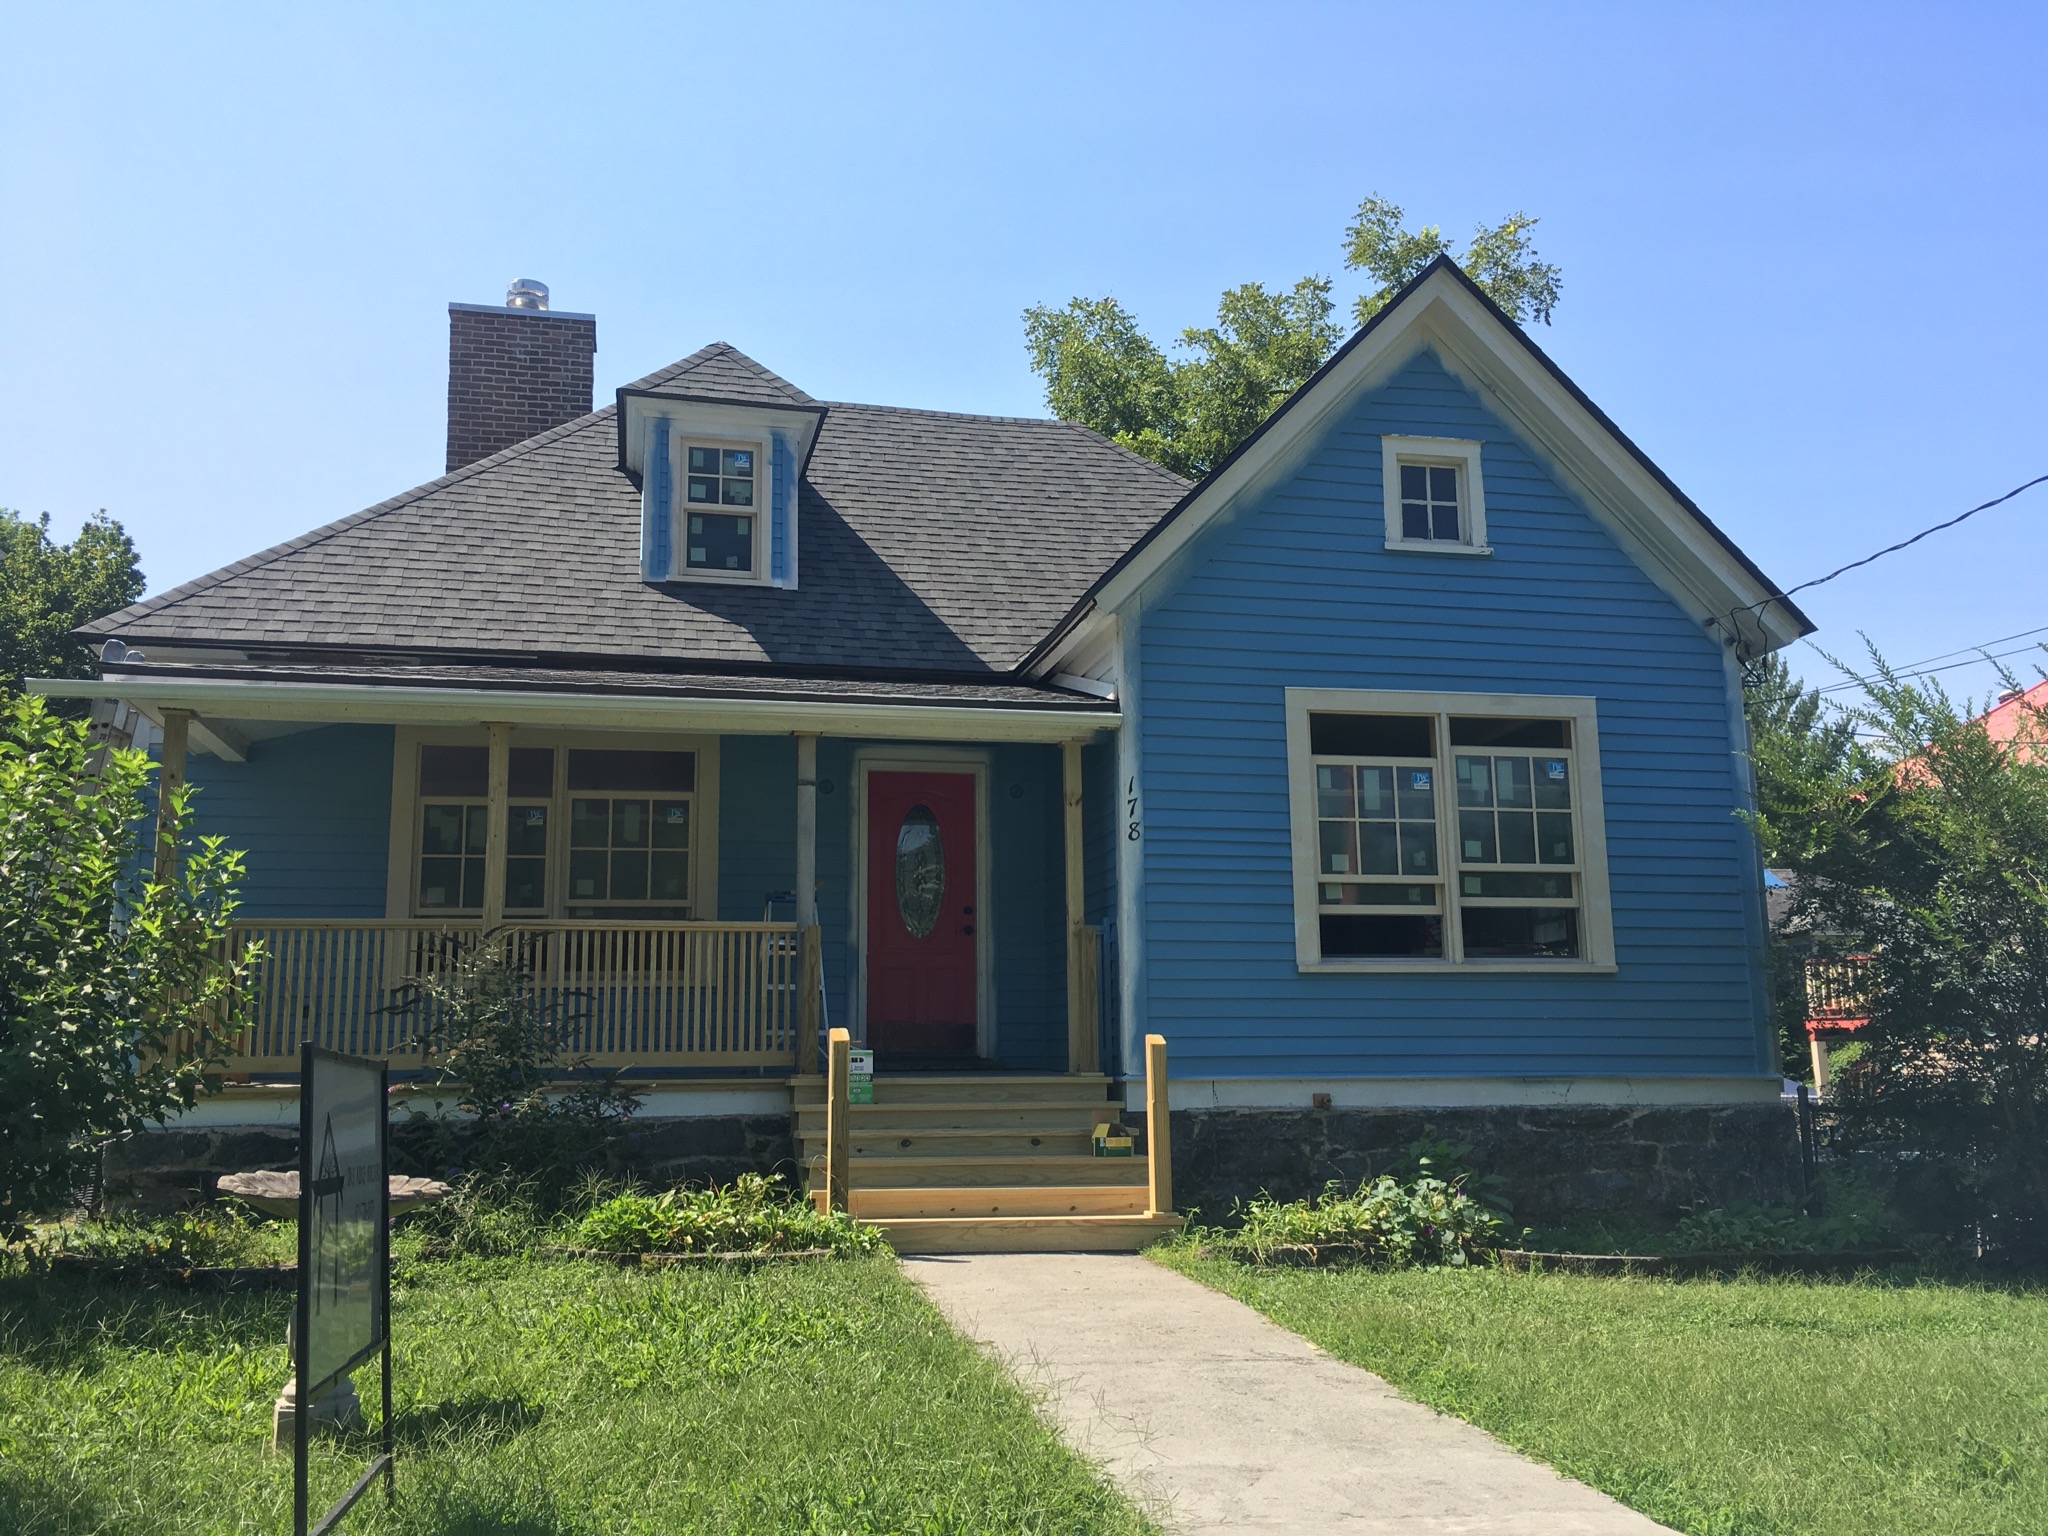 Blue house with white trim